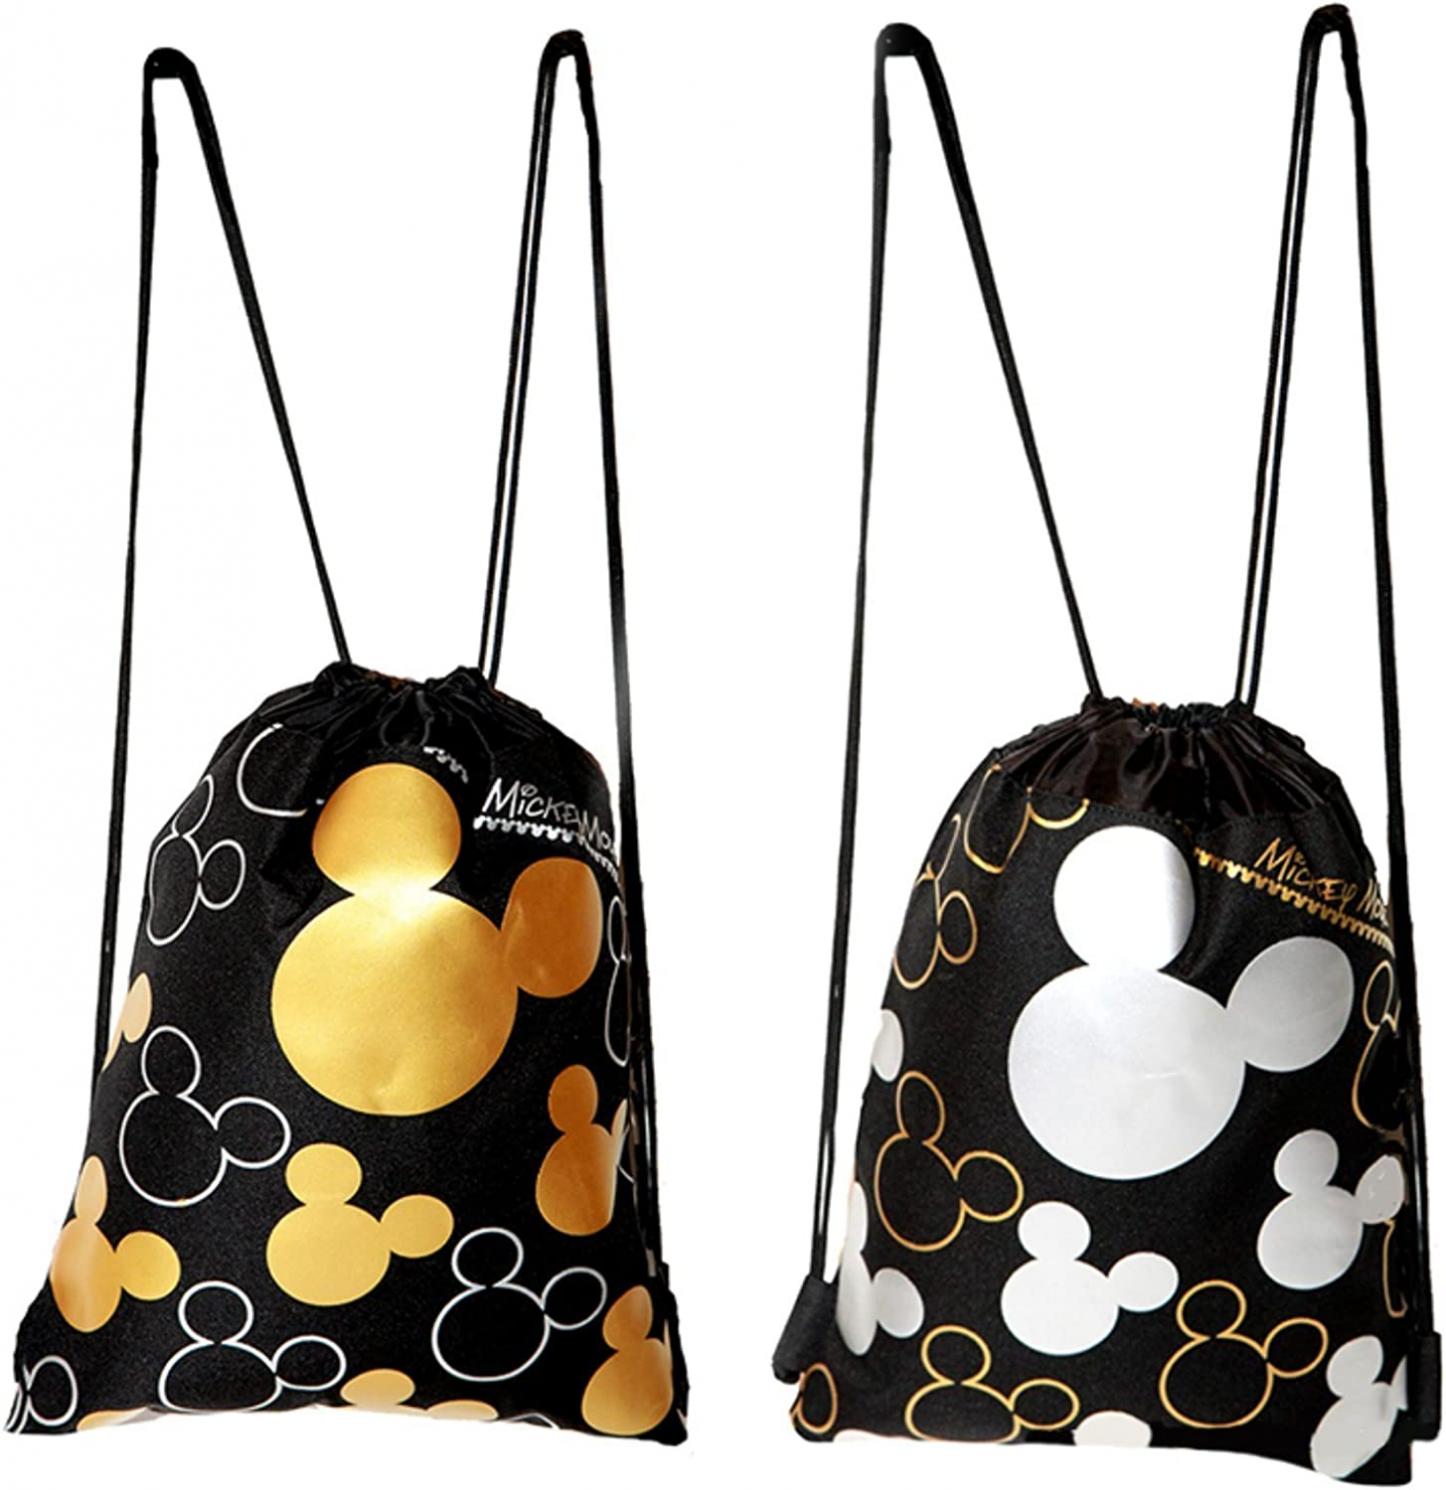 Disney Mickey Mouse Drawstring Backpack 2 Pack